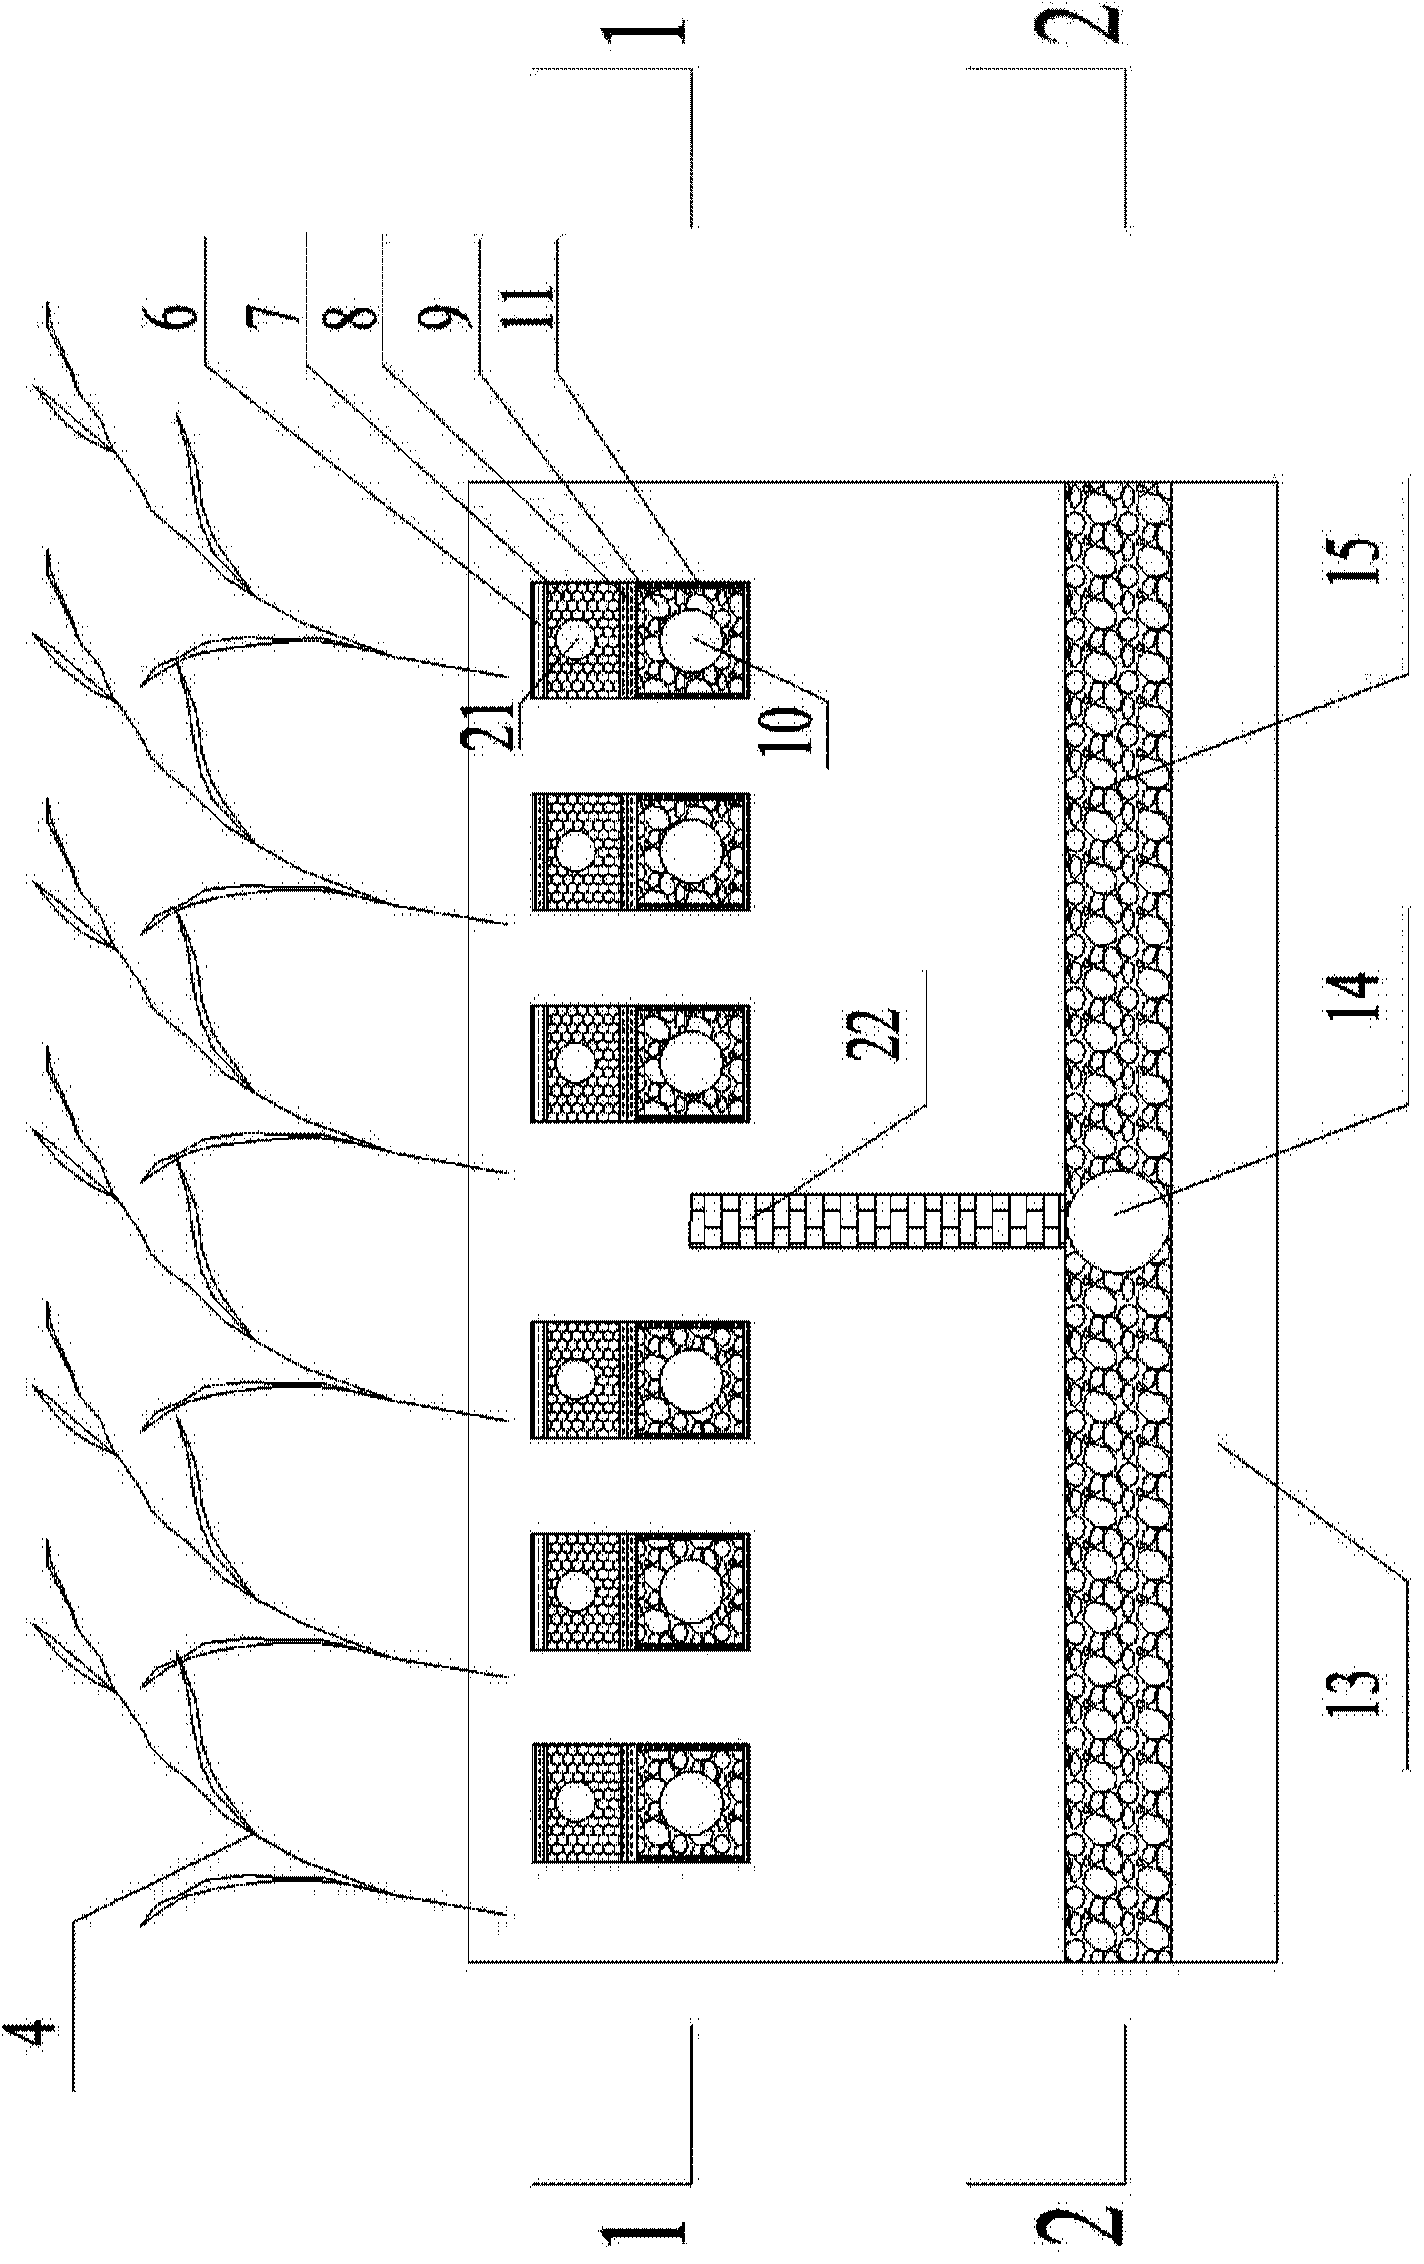 Treatment device for recycling micro-invasive excavation multi-medium subsurface leachate as water for cultivation